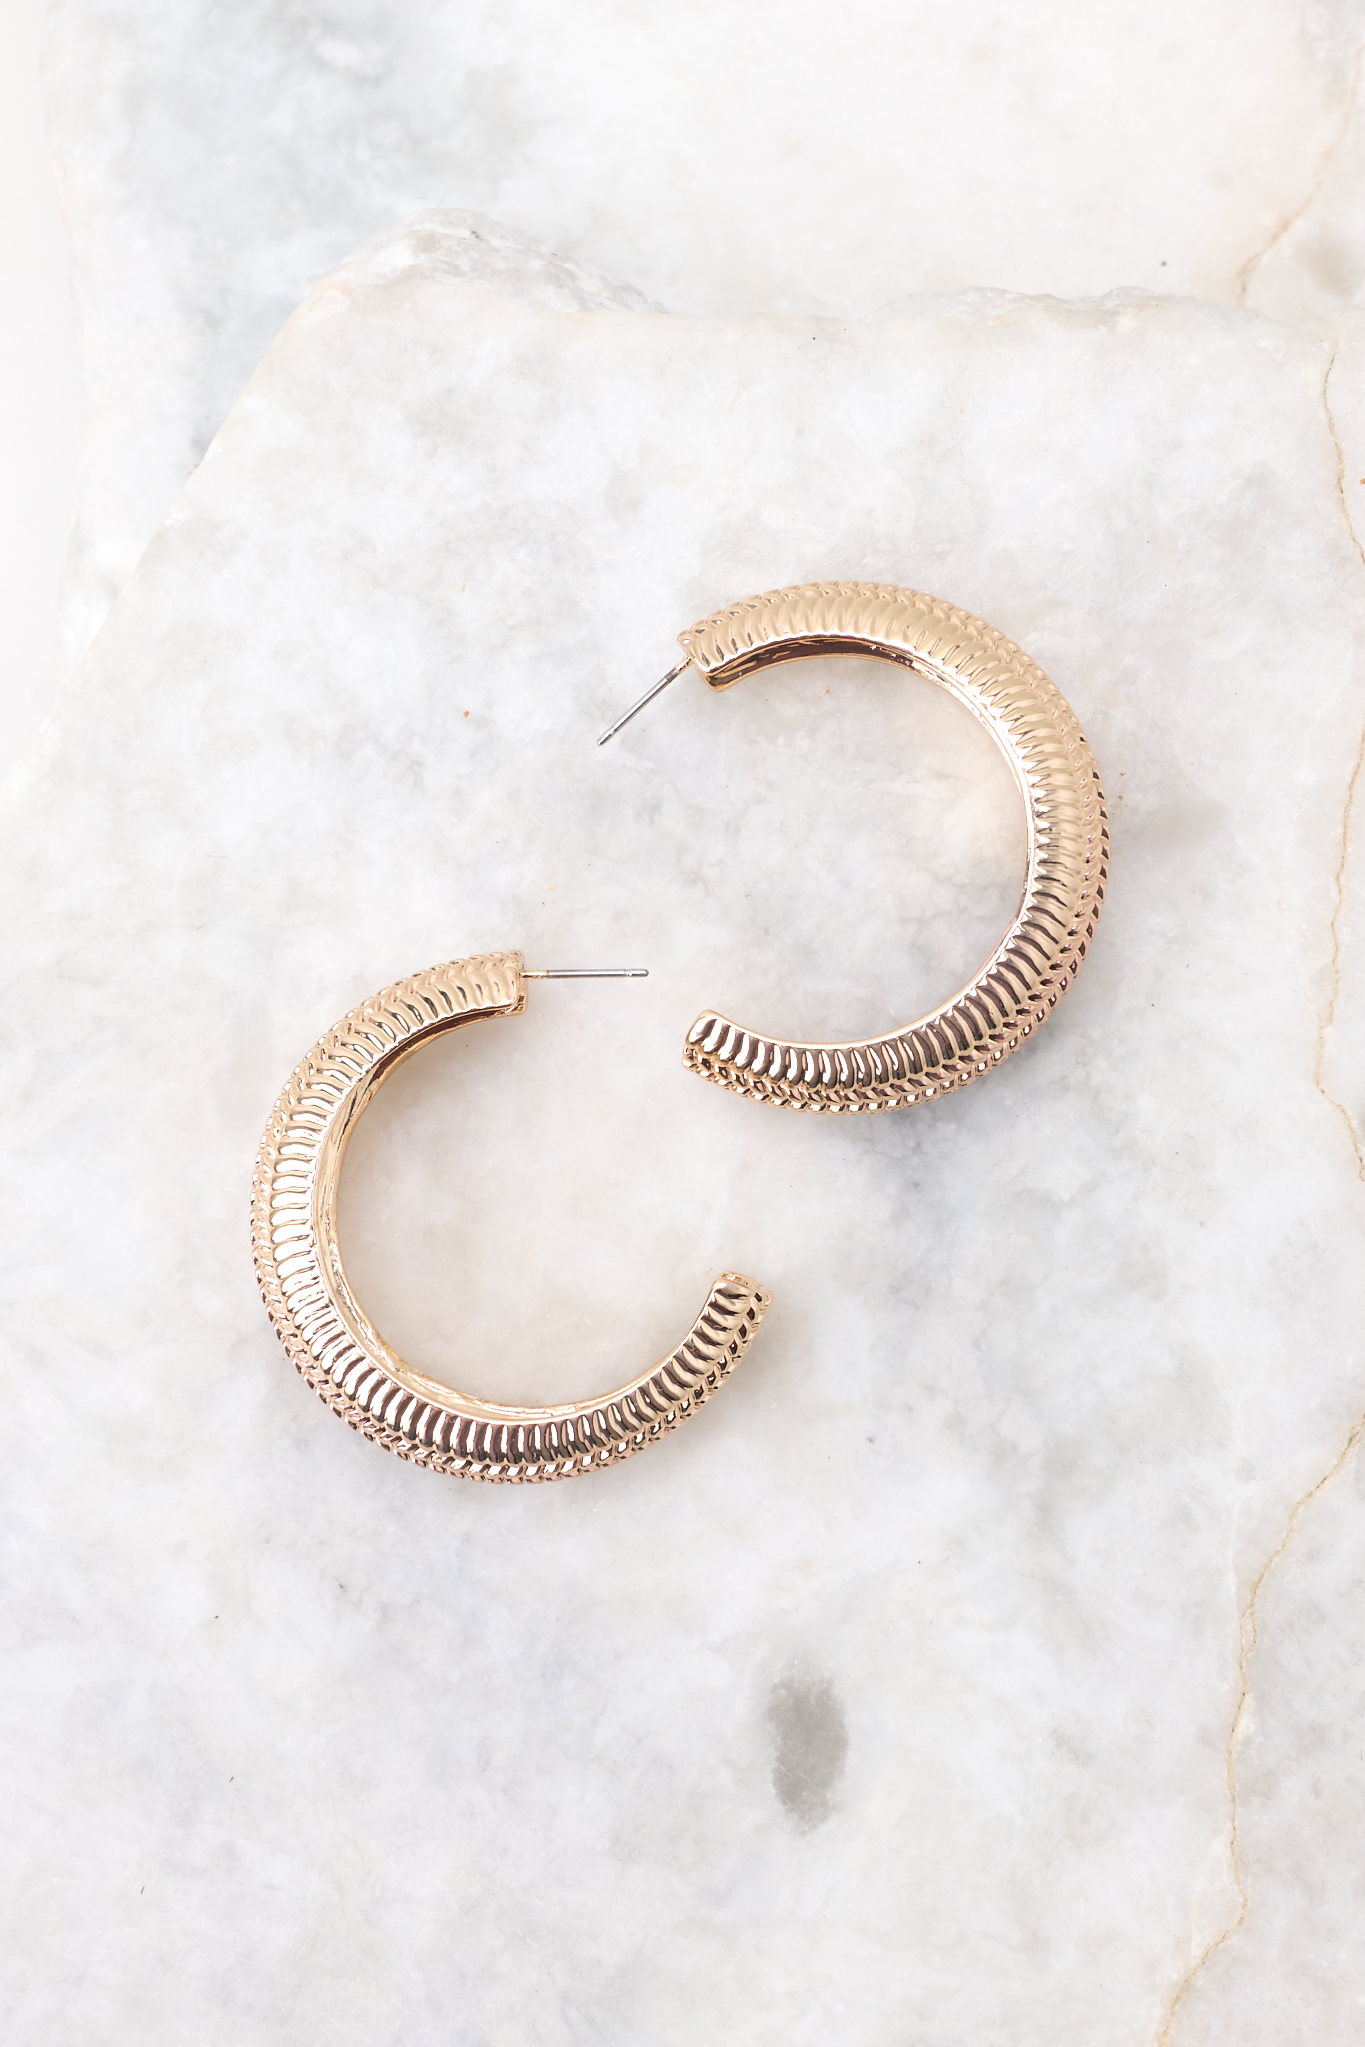 Overhead close view of earrings that feature a gold textured finish, a wide hoop design, and secure post-back fastening.